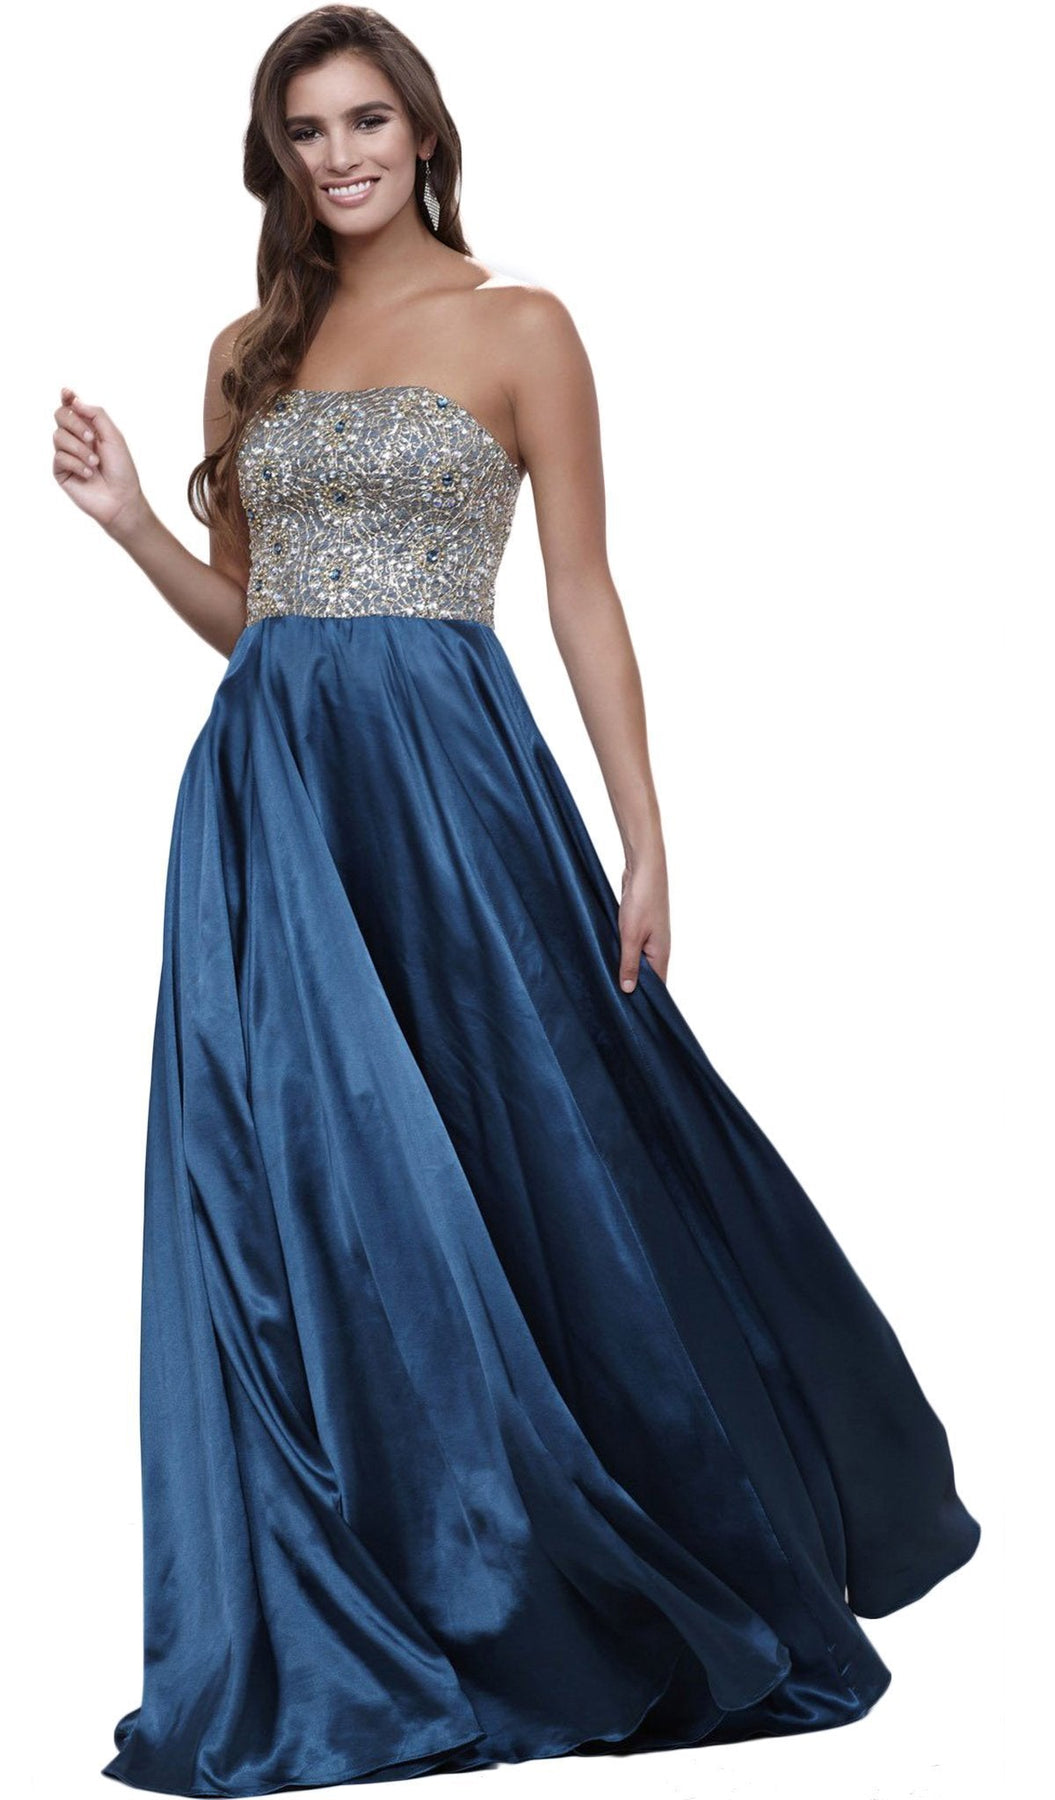 Nox Anabel - 8186 Metallic Embellished Strapless Long Evening Gown Special Occasion Dress XS / Teal